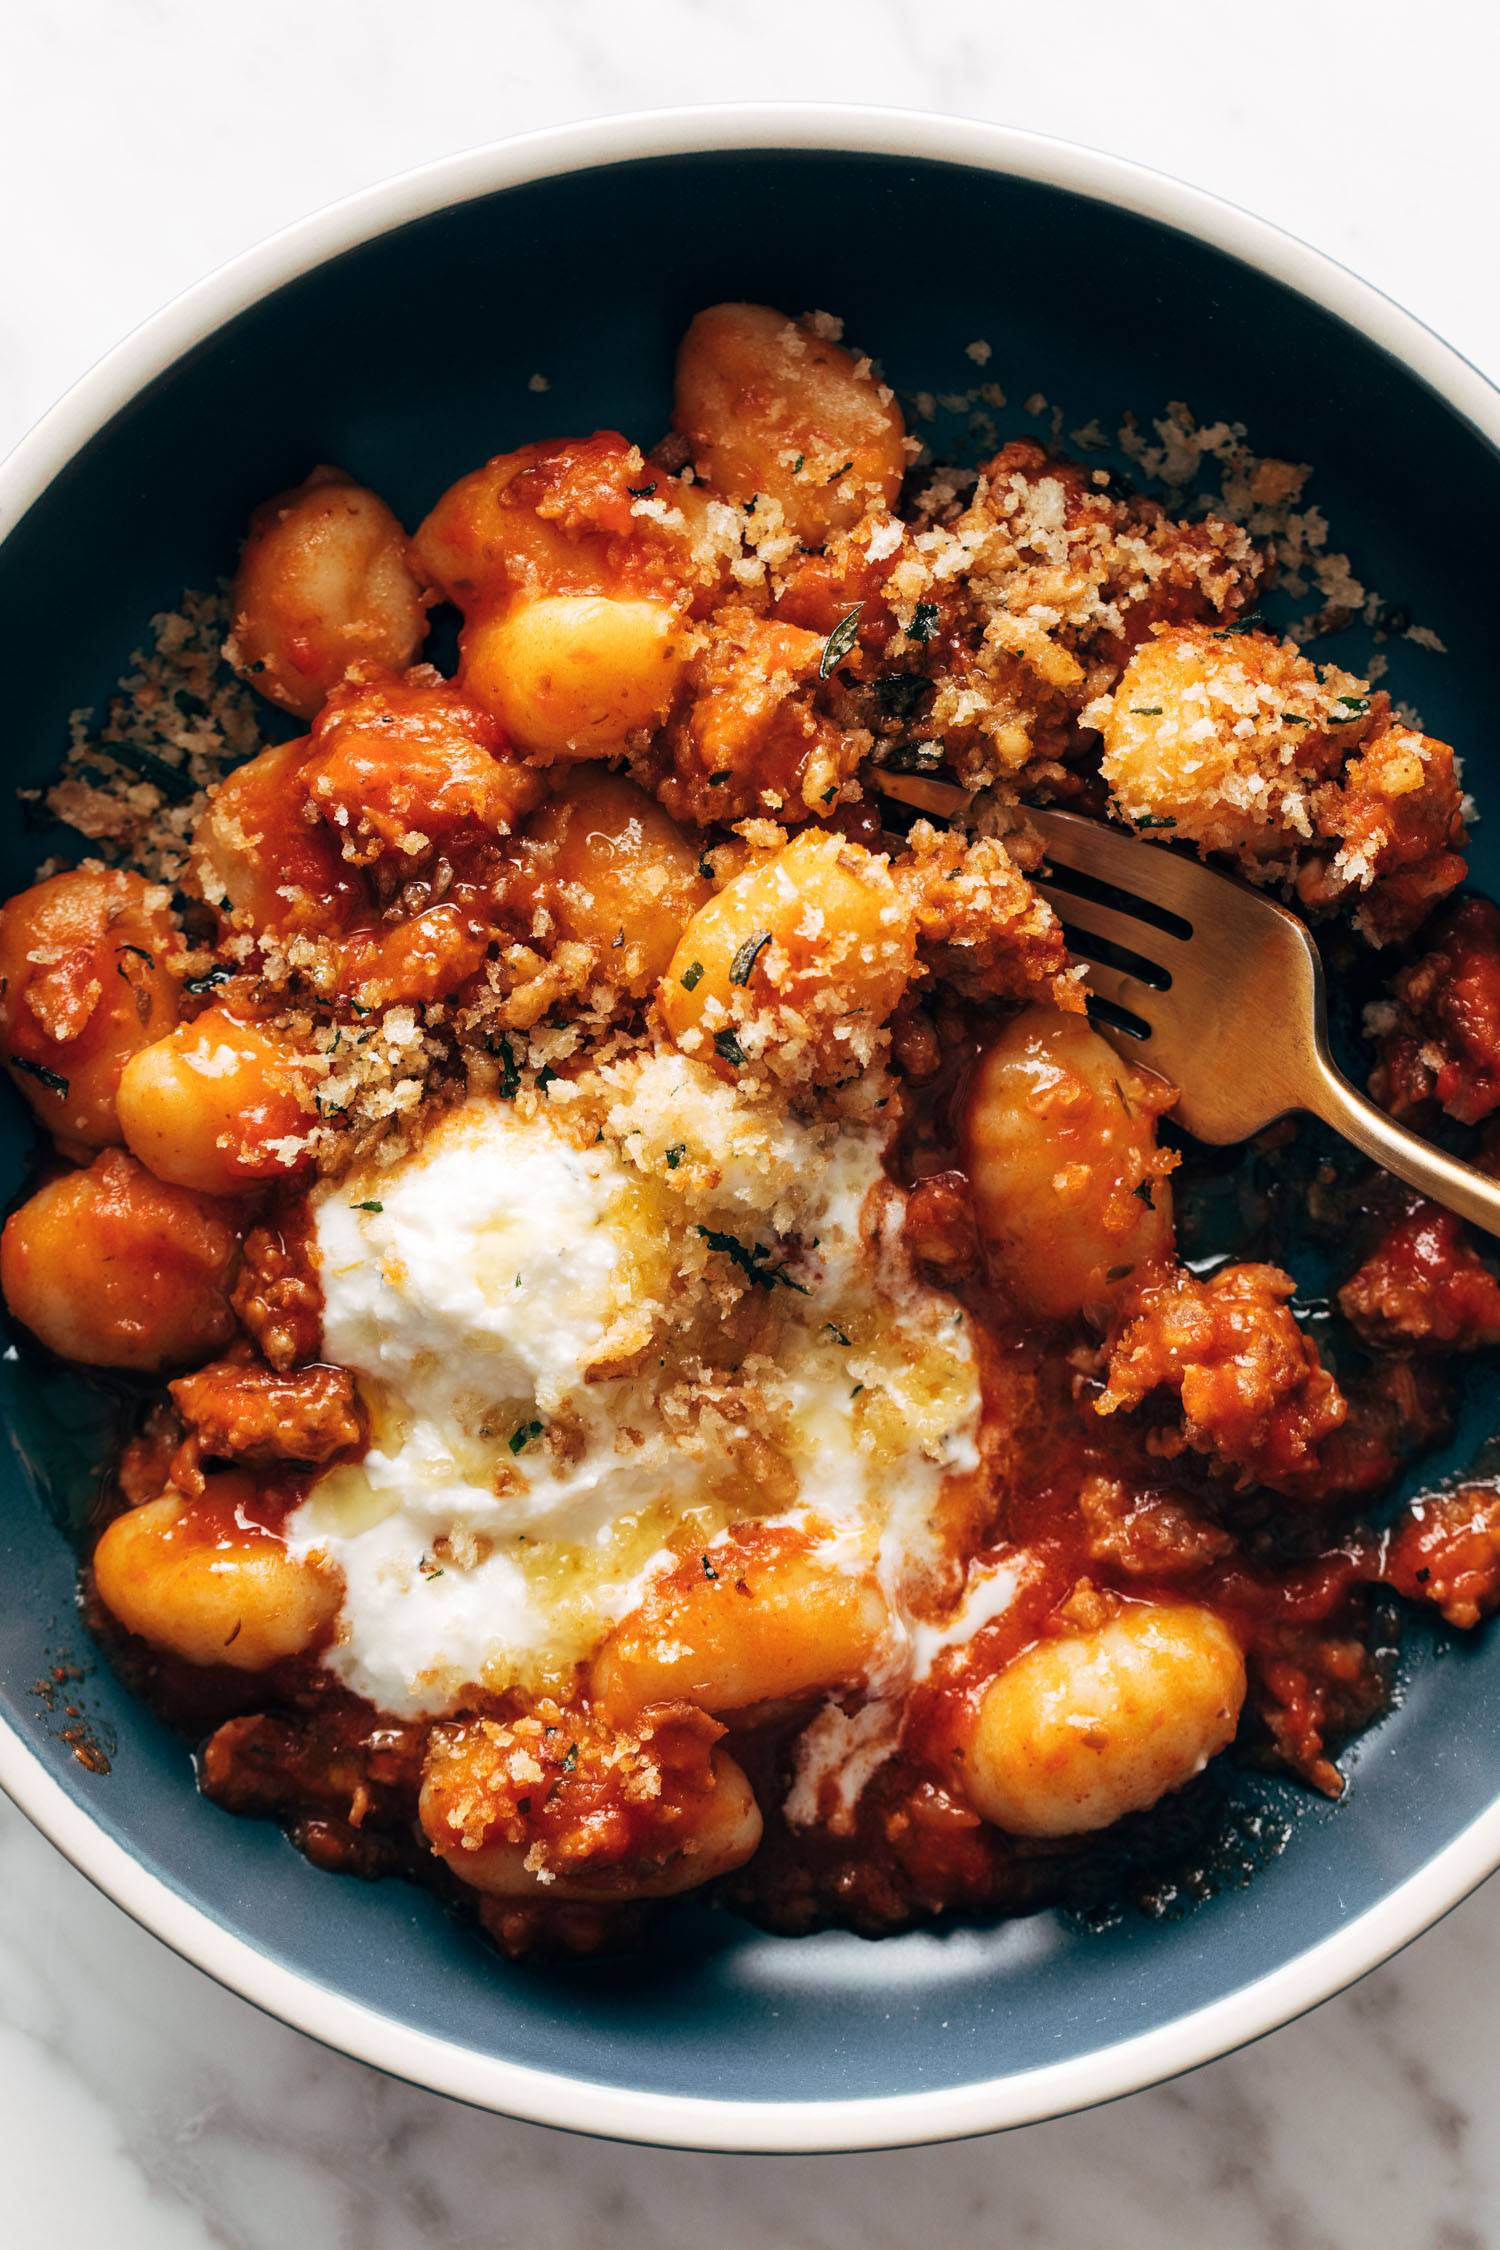 Gnocchi with red sauce and ricotta in a bowl.